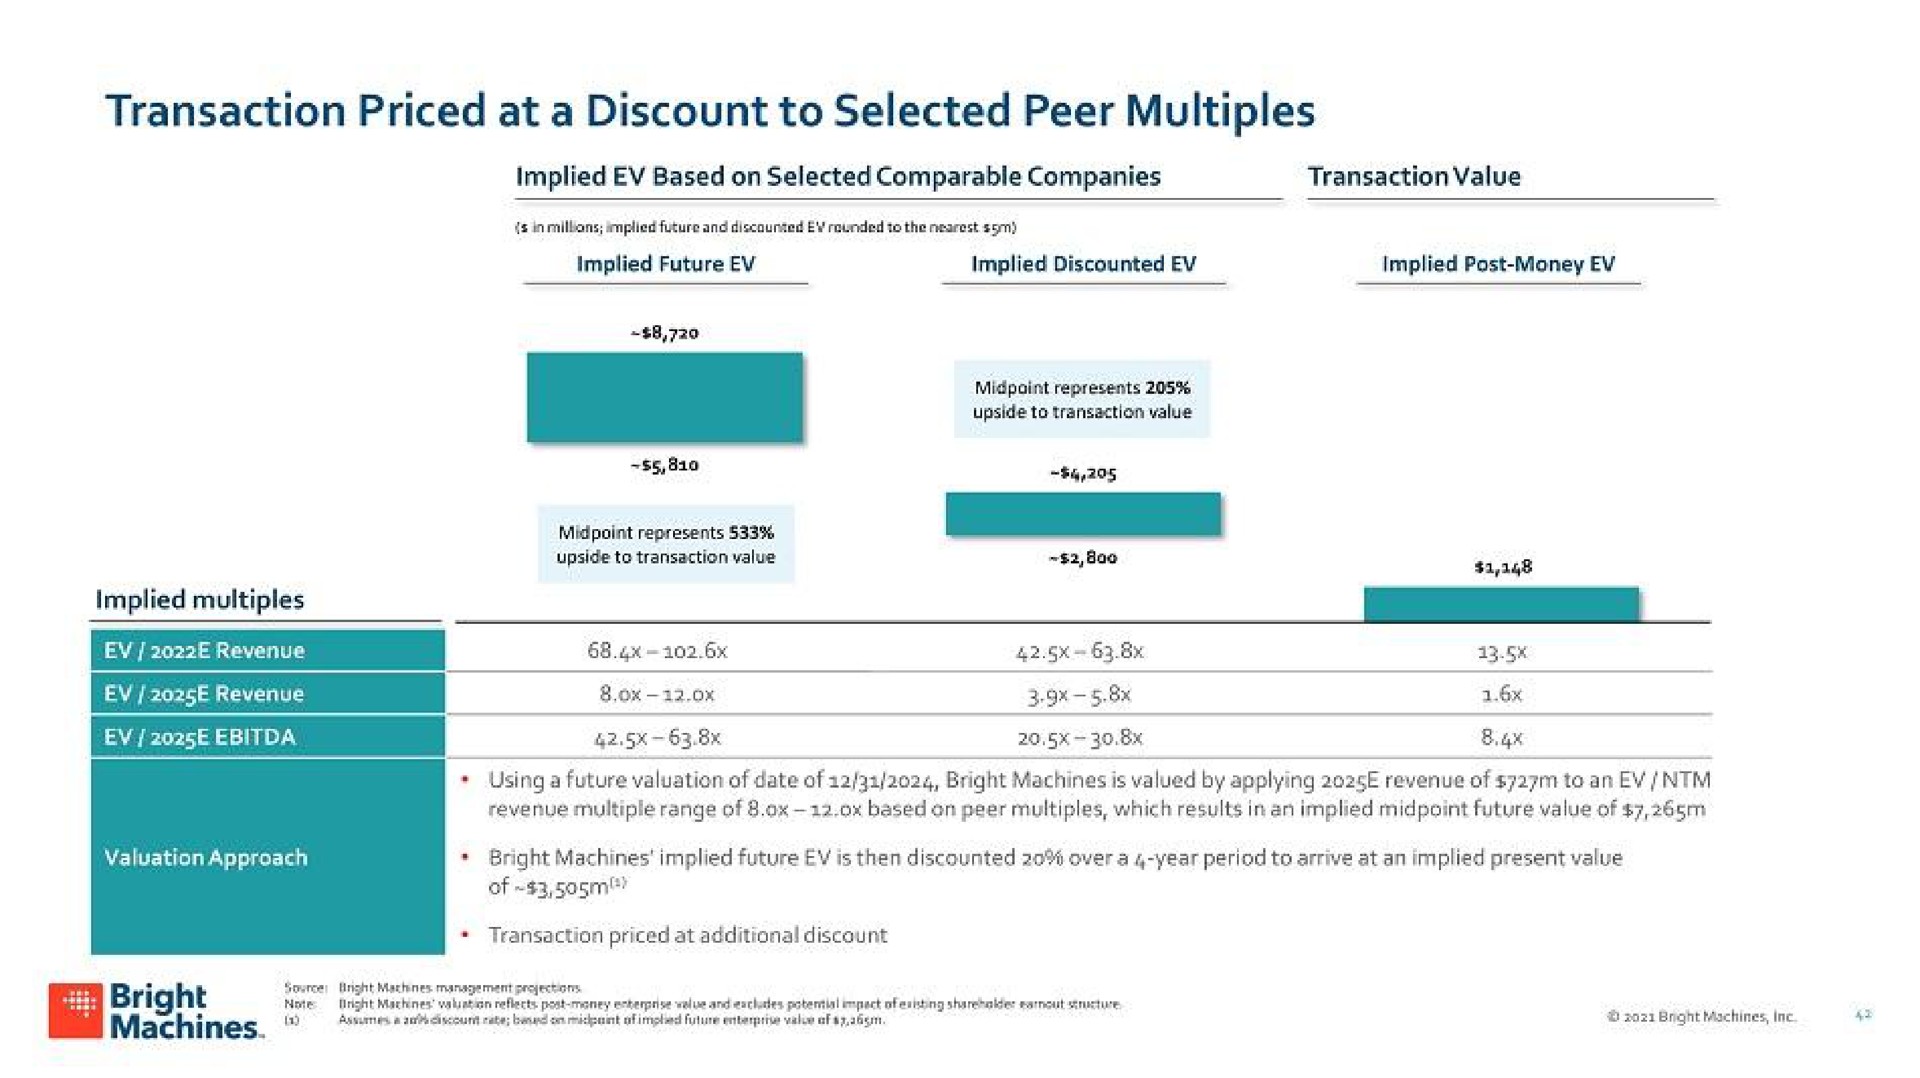 transaction priced at a discount to selected peer multiples | Bright Machines